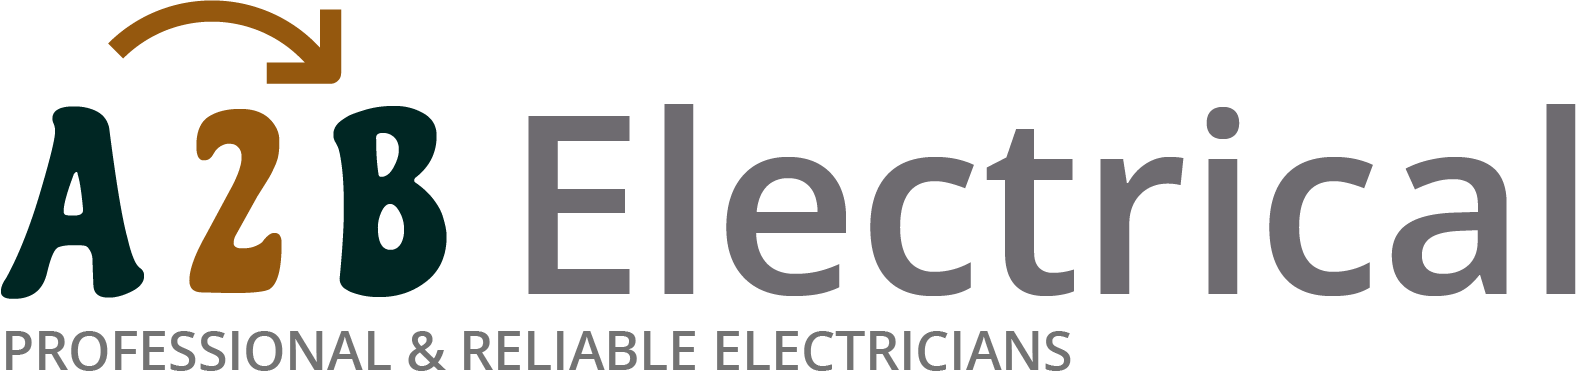 If you have electrical wiring problems in Nuneaton, we can provide an electrician to have a look for you. 